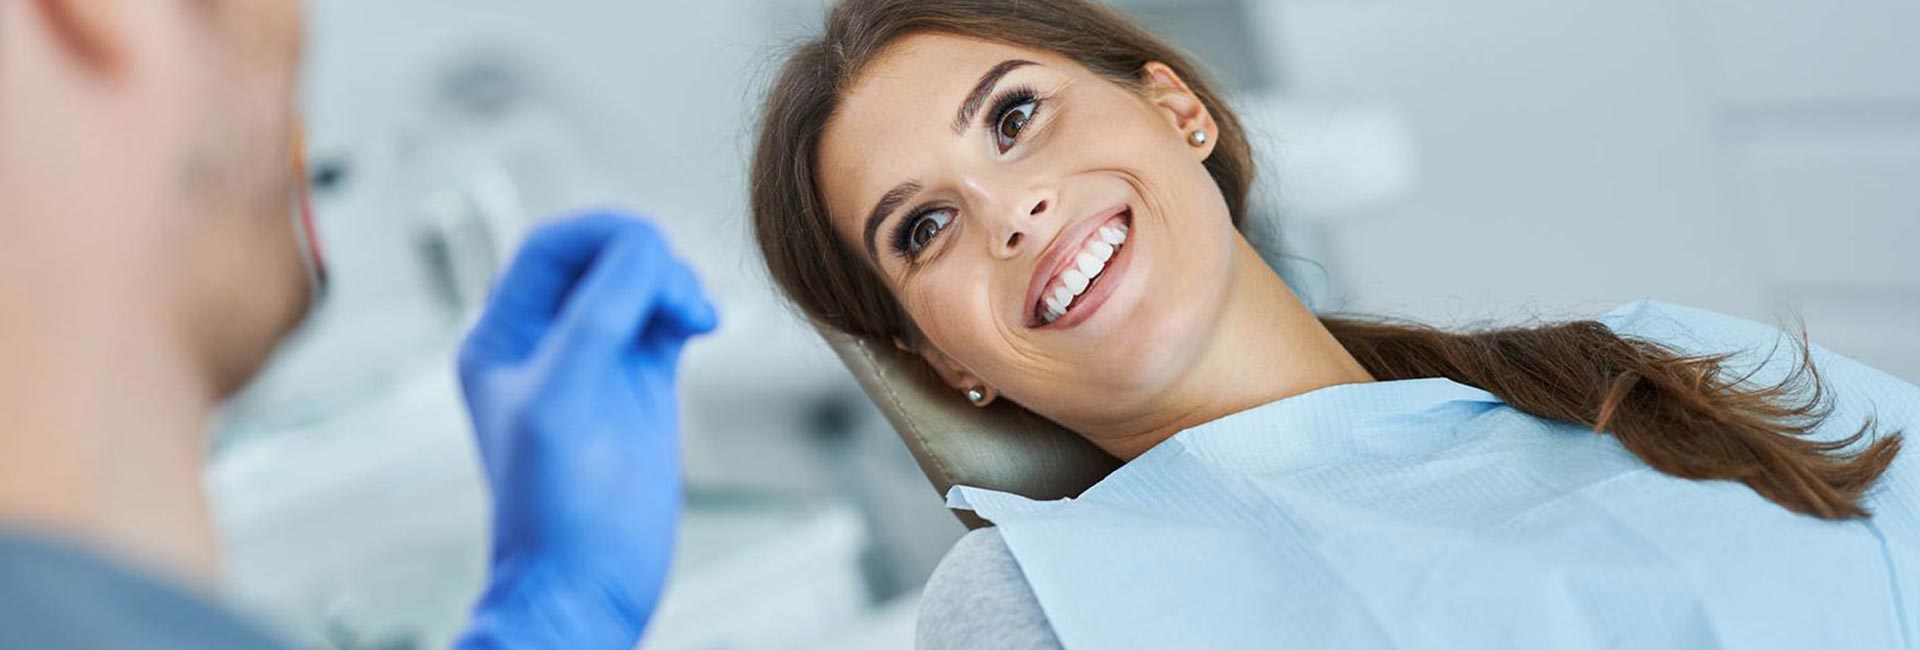 A young patient smiling during a conversation with the dentist